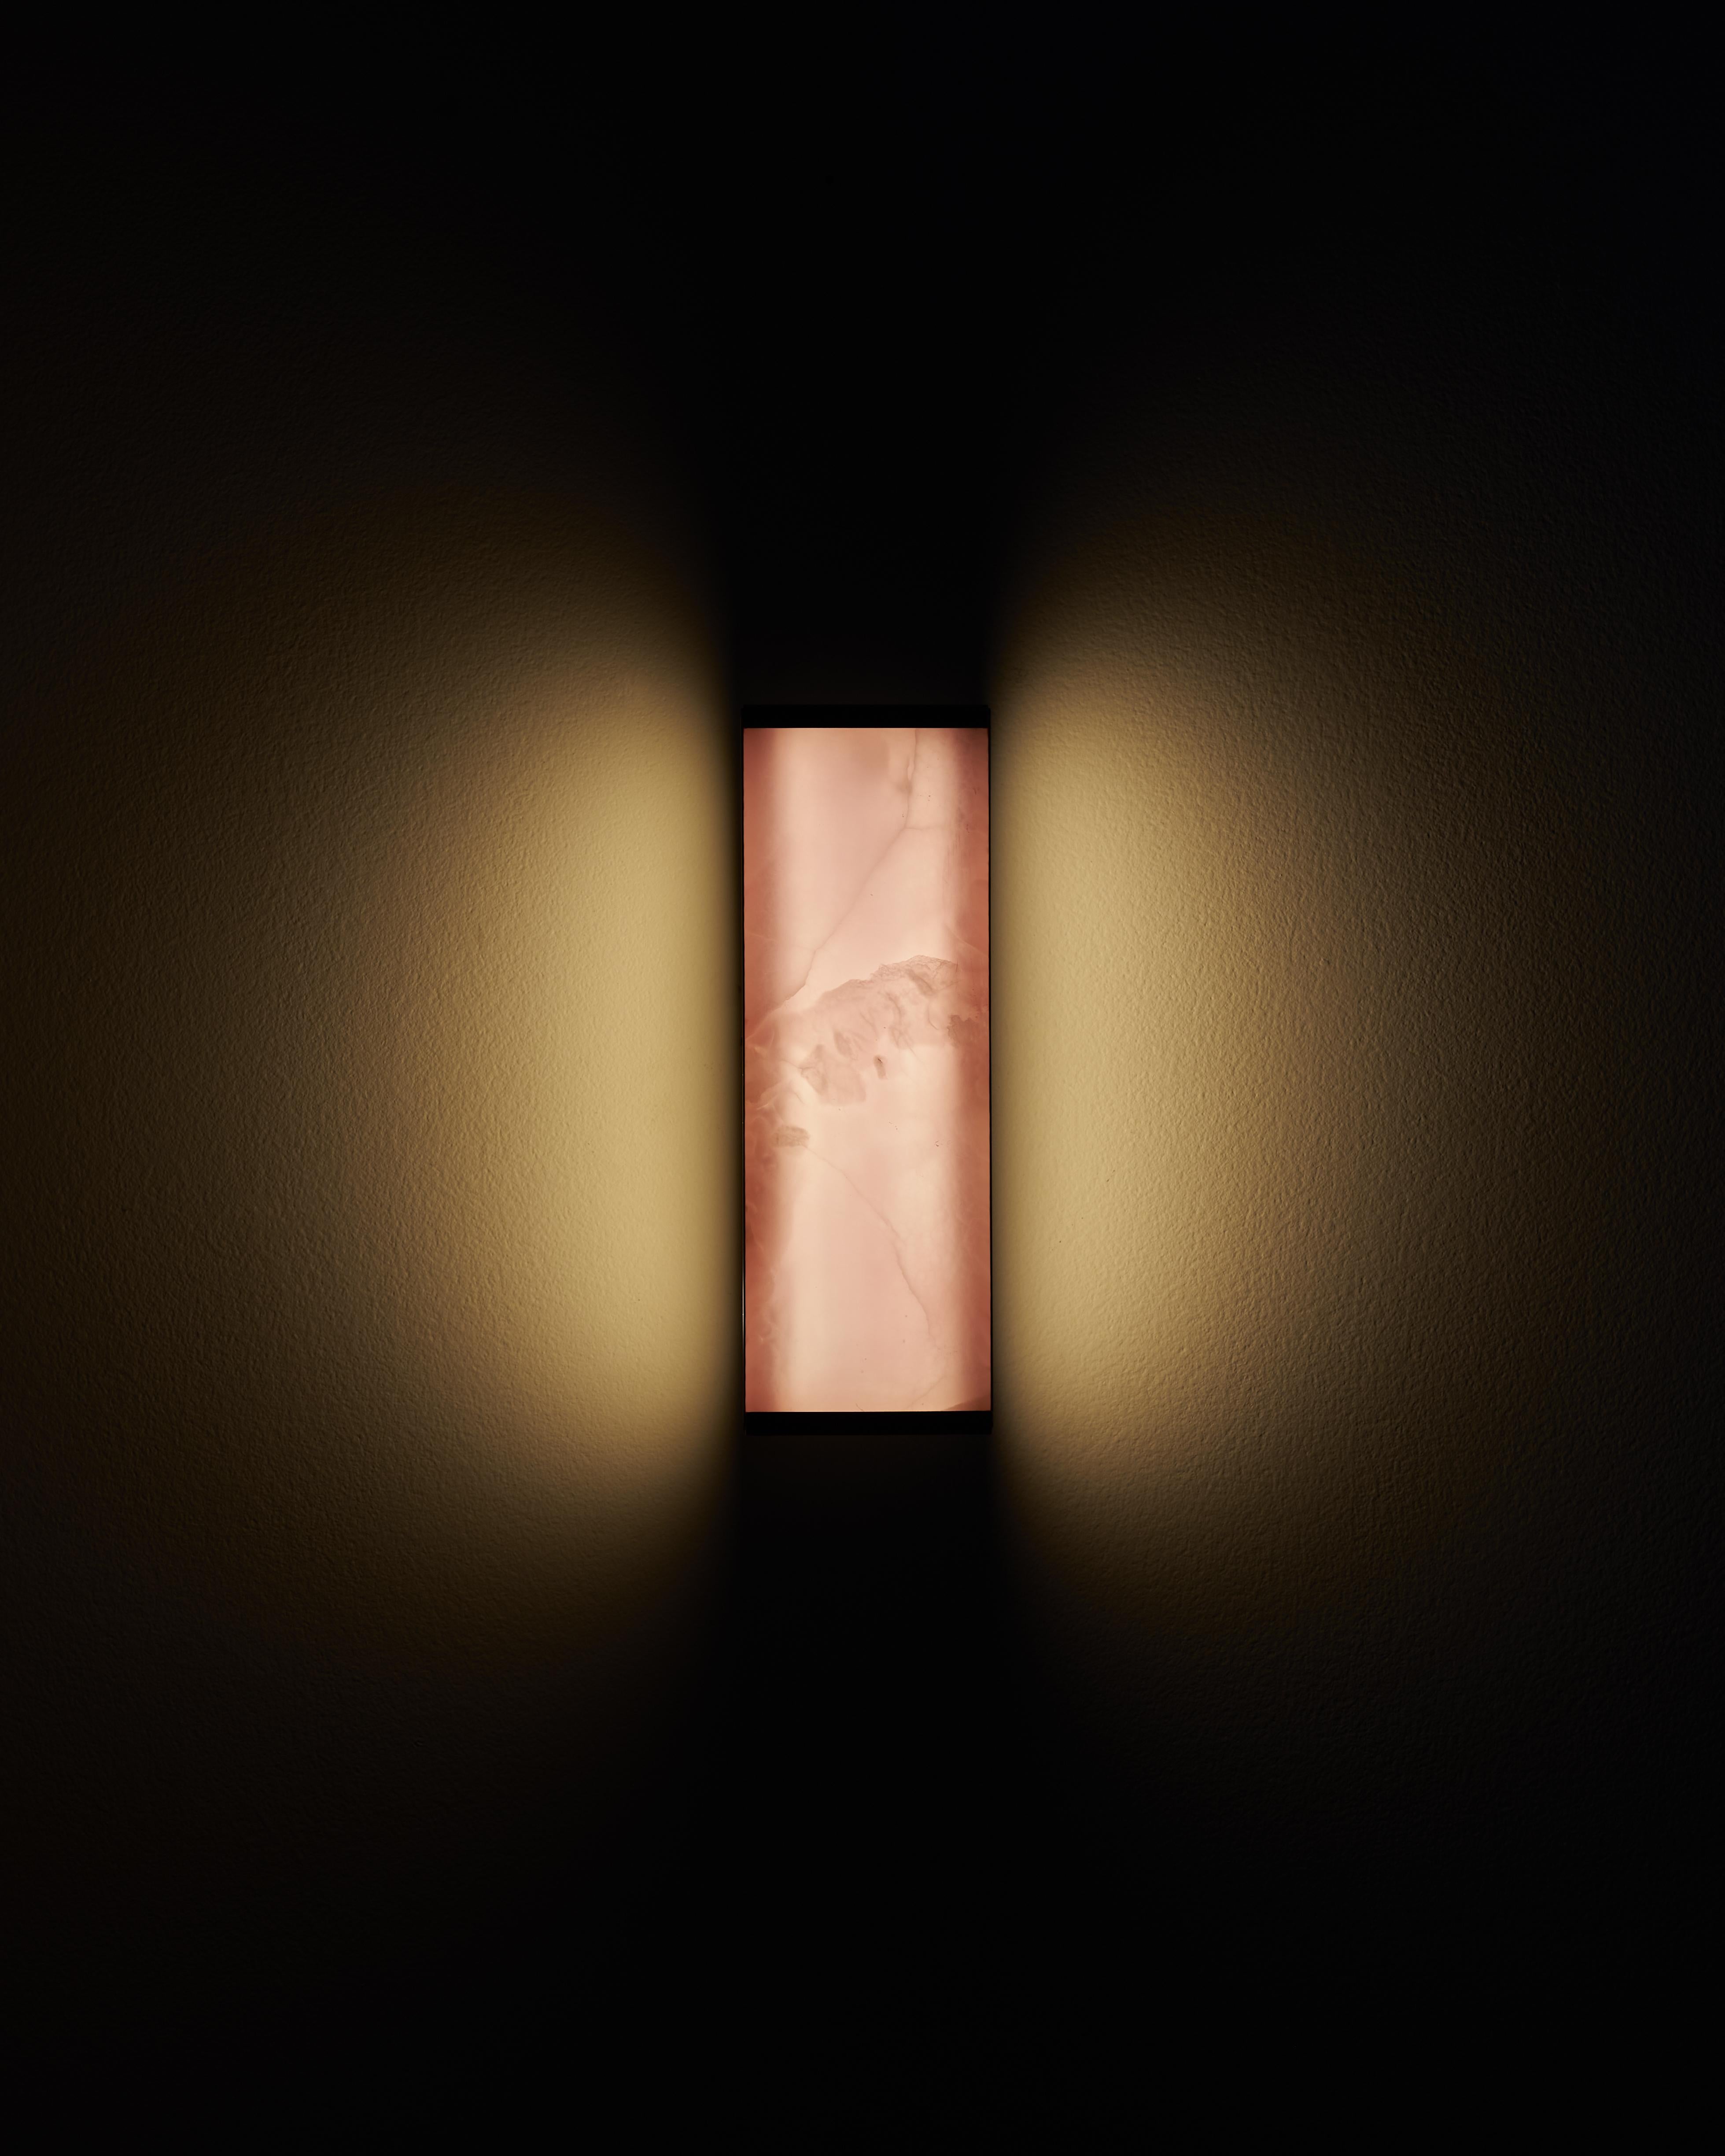 The Tech short wall sconce is a lighting fixture designed to seamlessly integrate the luminaire and lampshade into a singular unit, using the translucent properties of ultra-thin onyx to create an interplay of light and shadow that highlights the